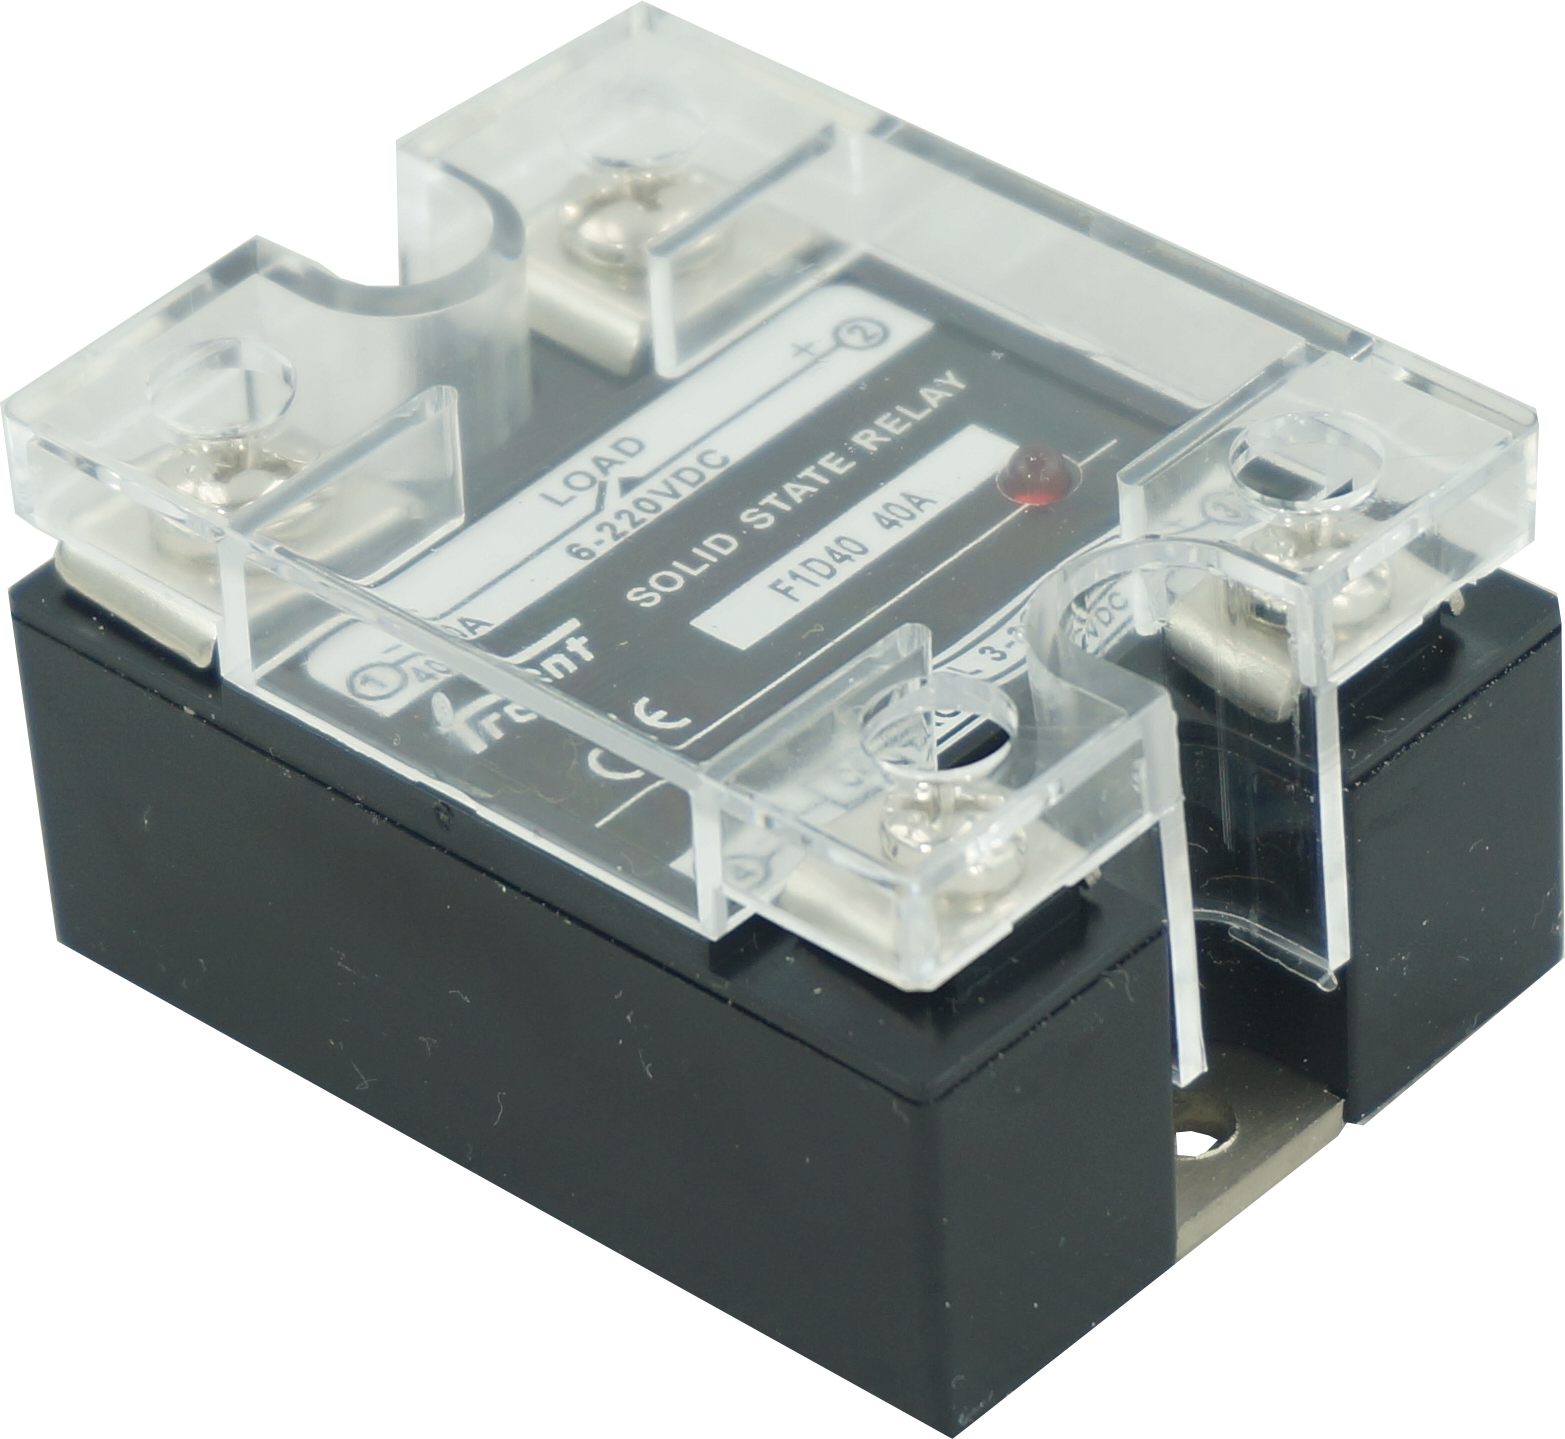 F1D40-220, Solid State Relay, DC 3.5-32VDC control, 40A, 20-220VDC Load